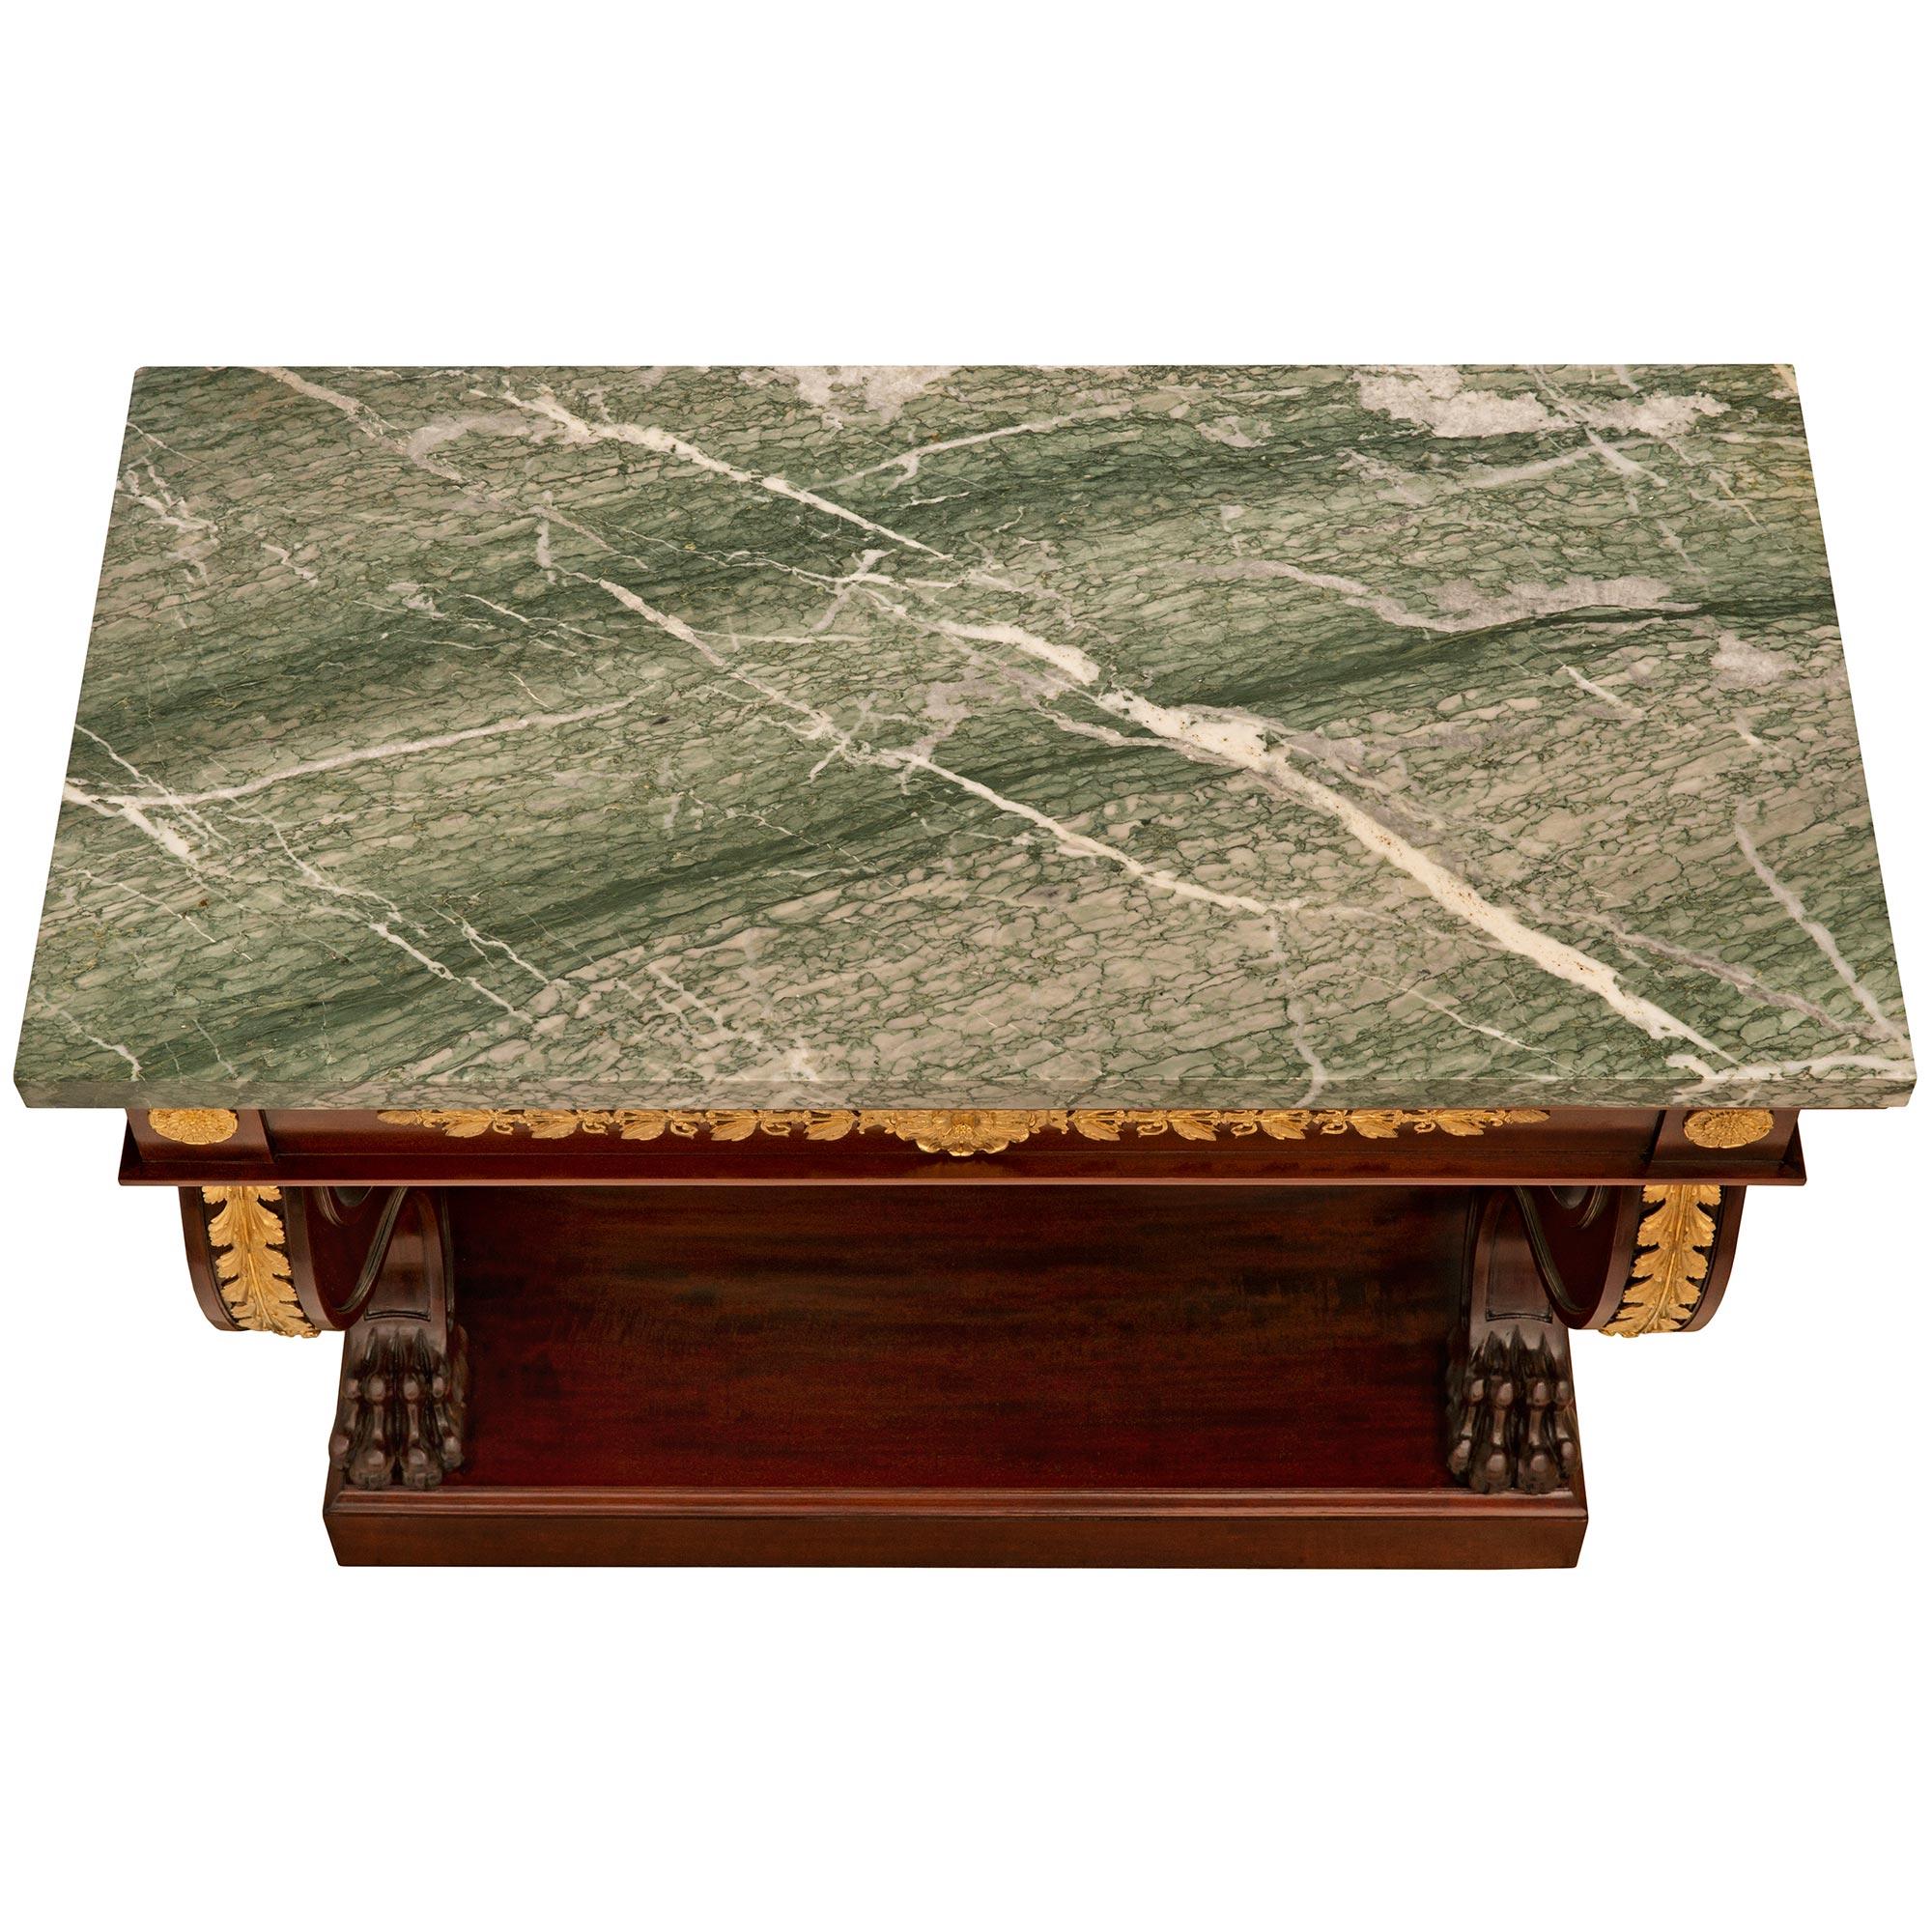 A handsome French 19th century Empire st. Mahogany, Ormolu and Vert Campan marble console. The solid Mahogany console is raised on a rectangular plinth with a mottled edge on the three sides. Above are the 'S' scrolled front supports ending with